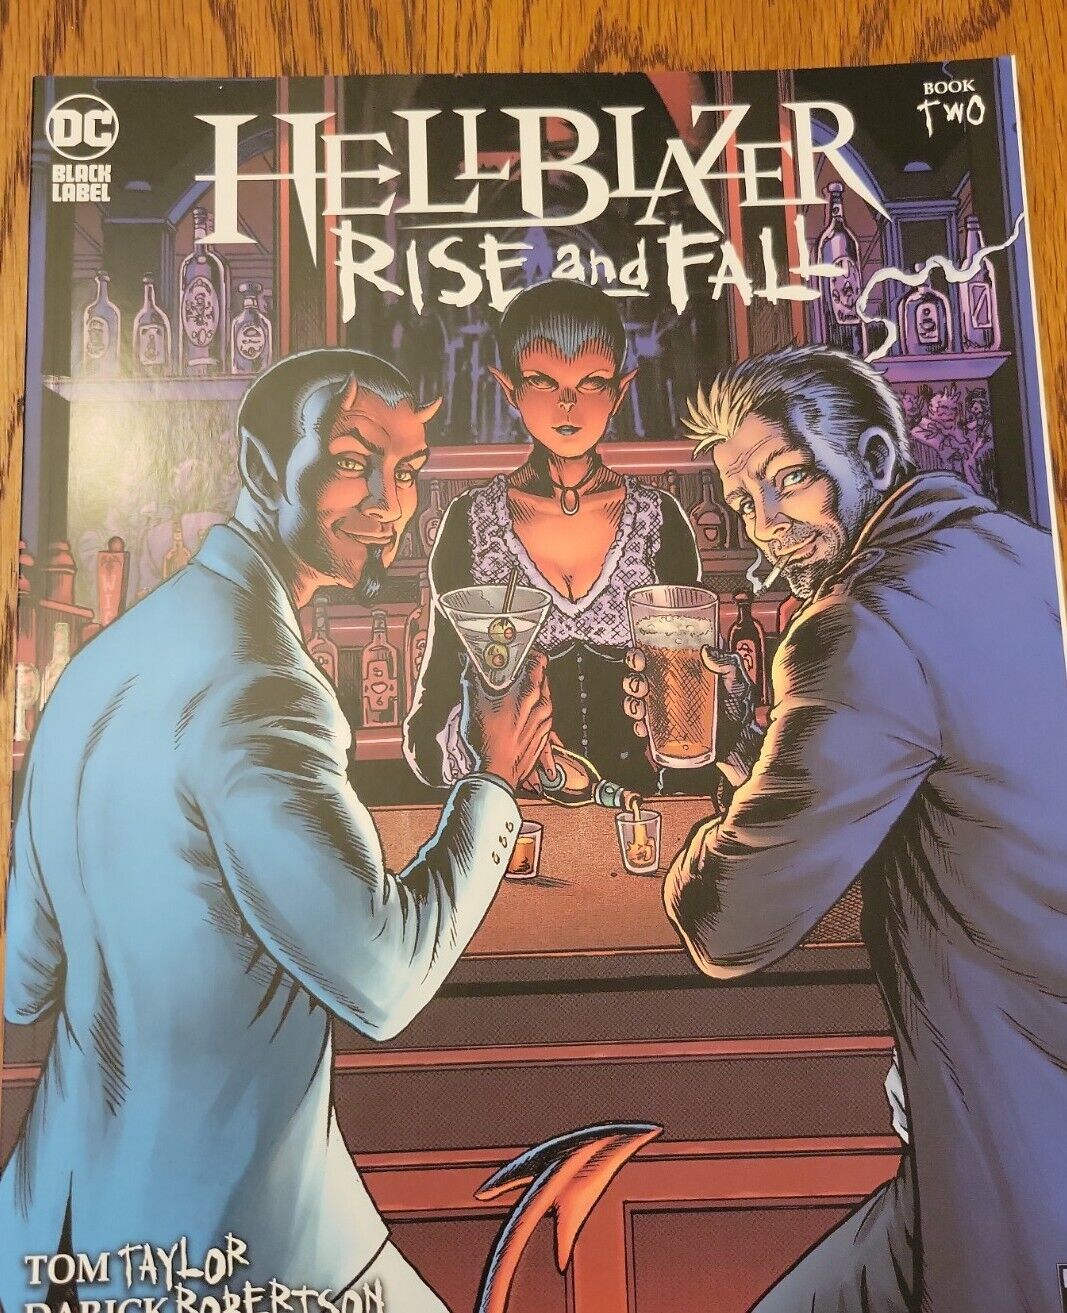 January 2021 Hellblazer Rise and Fall #2 (of 3) 